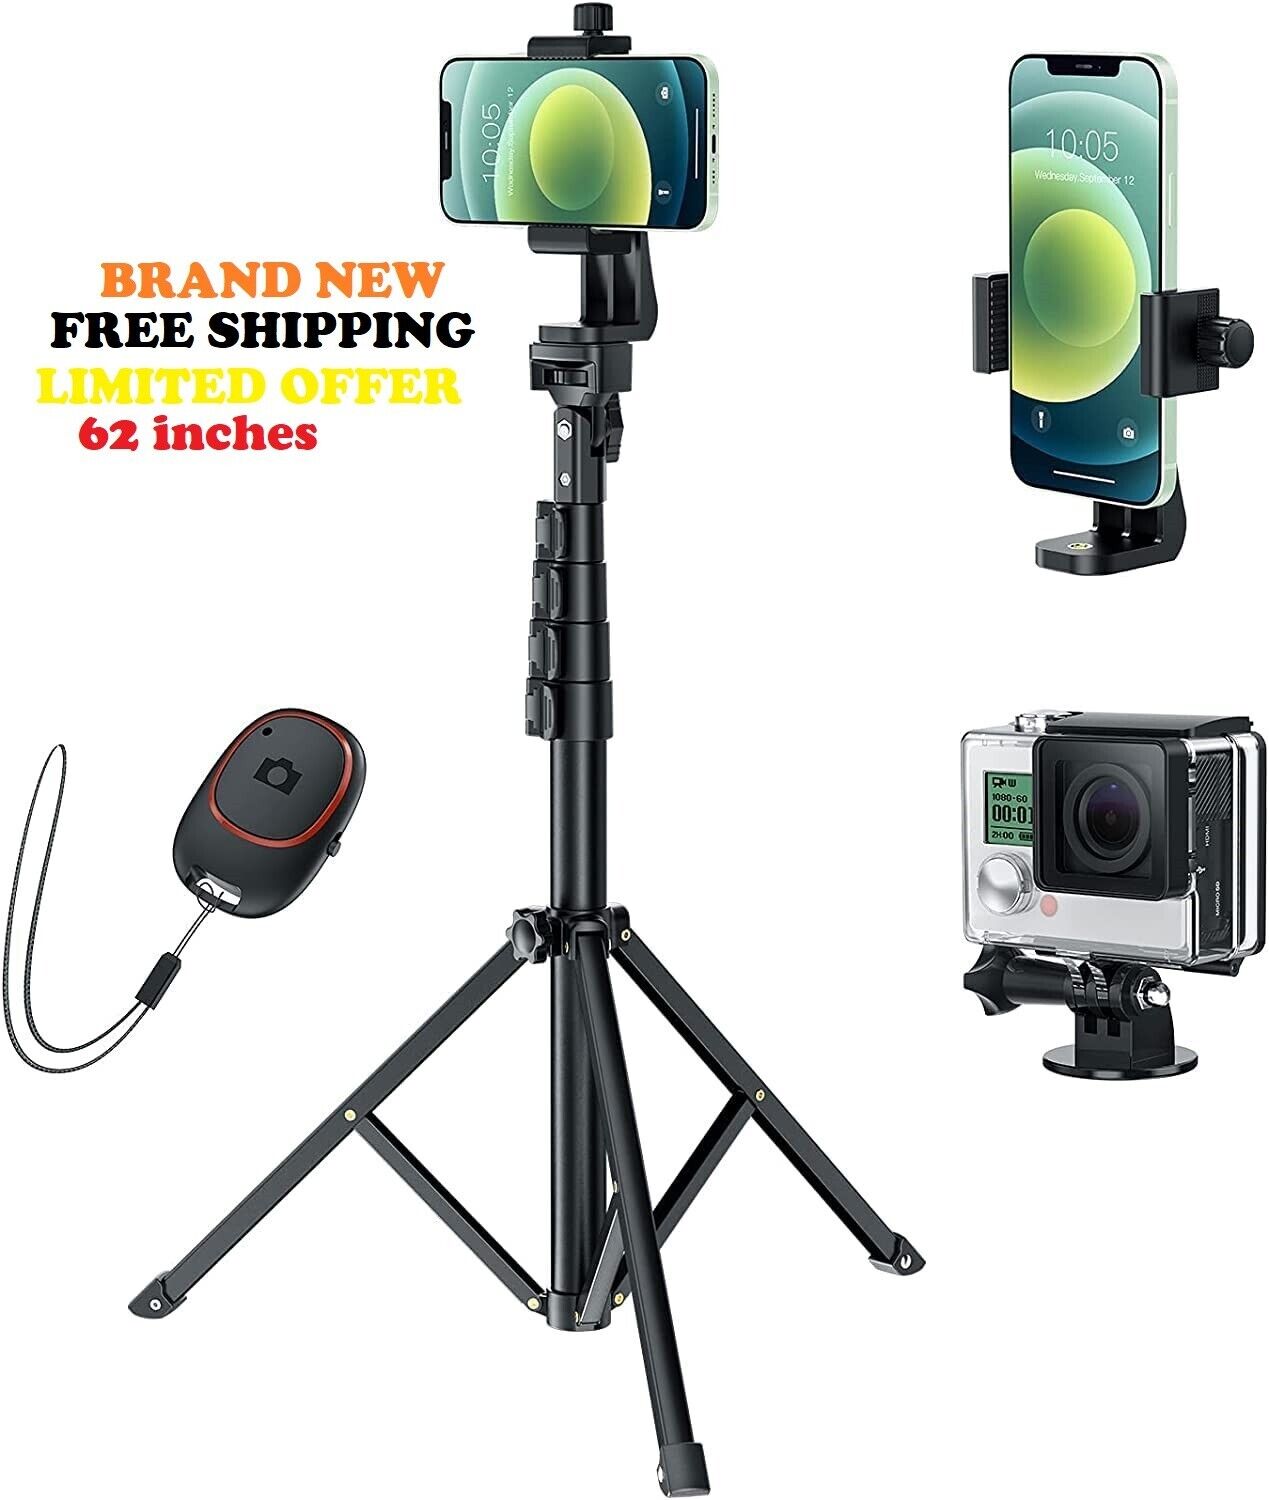 Professional Camera Phone Holder Tripod Stand for Smartphone iPhone Samsung+ Bag